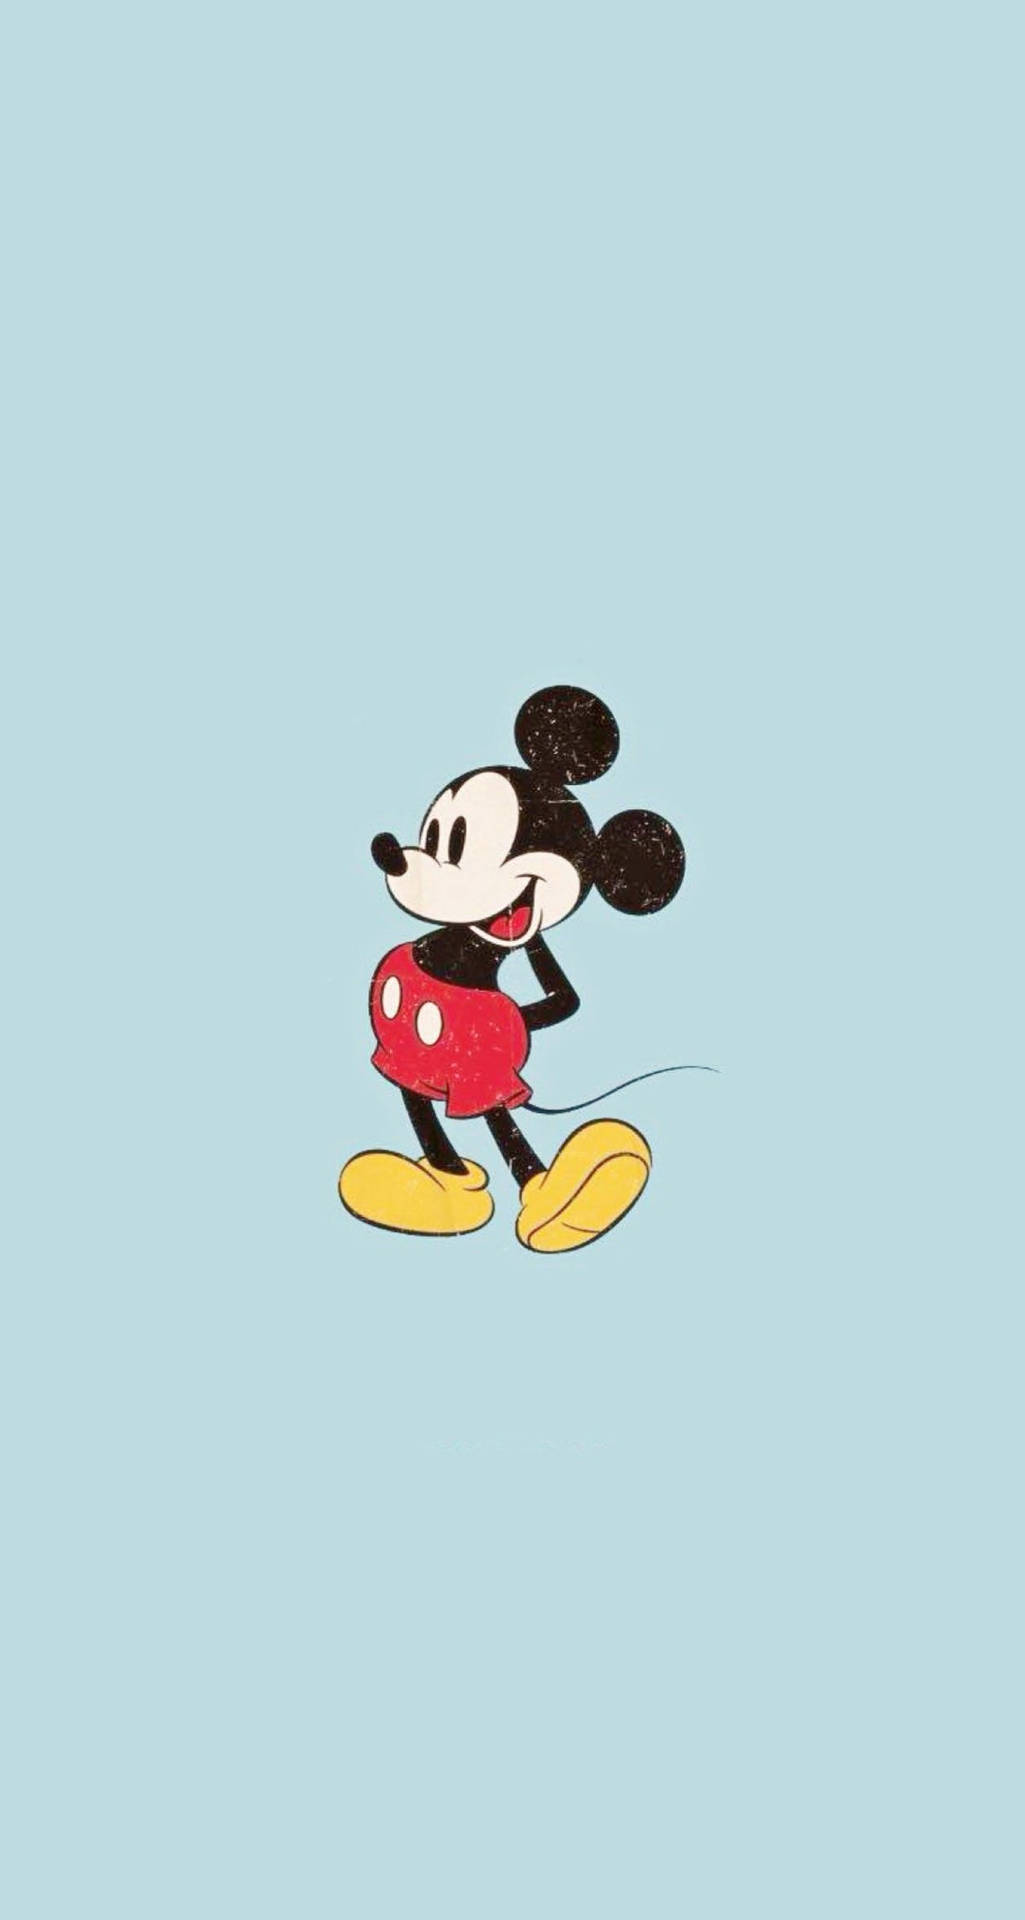 Top 999+ Mickey Mouse Wallpaper Full HD, 4K✅Free to Use